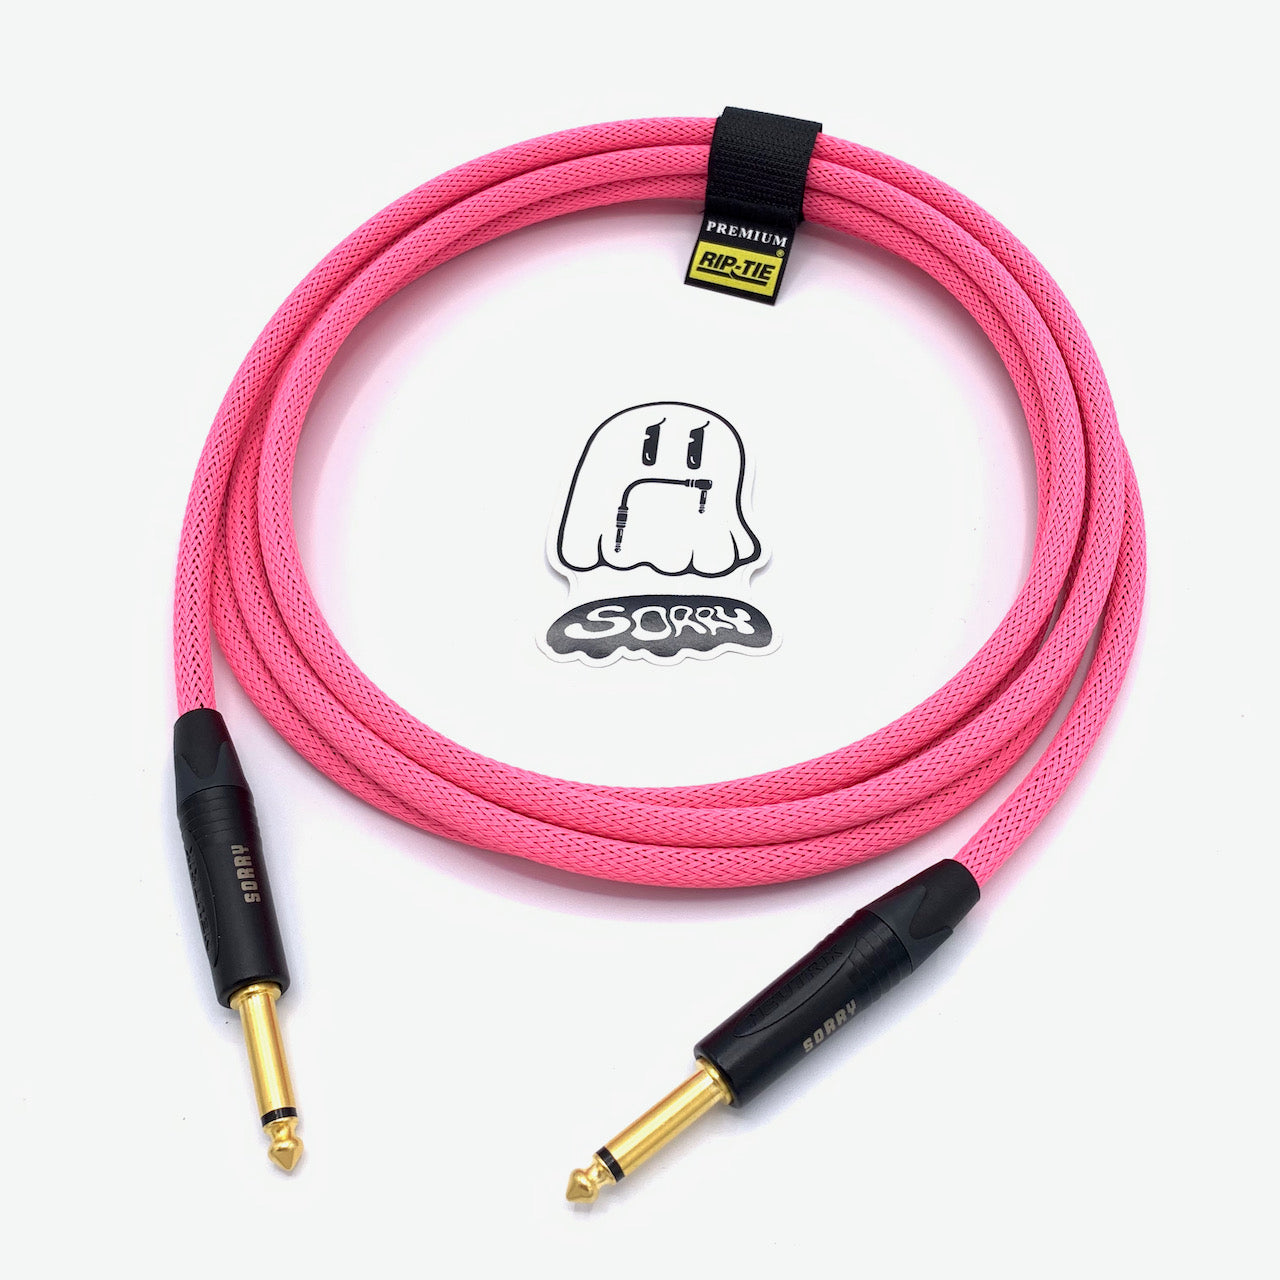 SORRY Microphone Cable - Neon Green – SORRY Cables